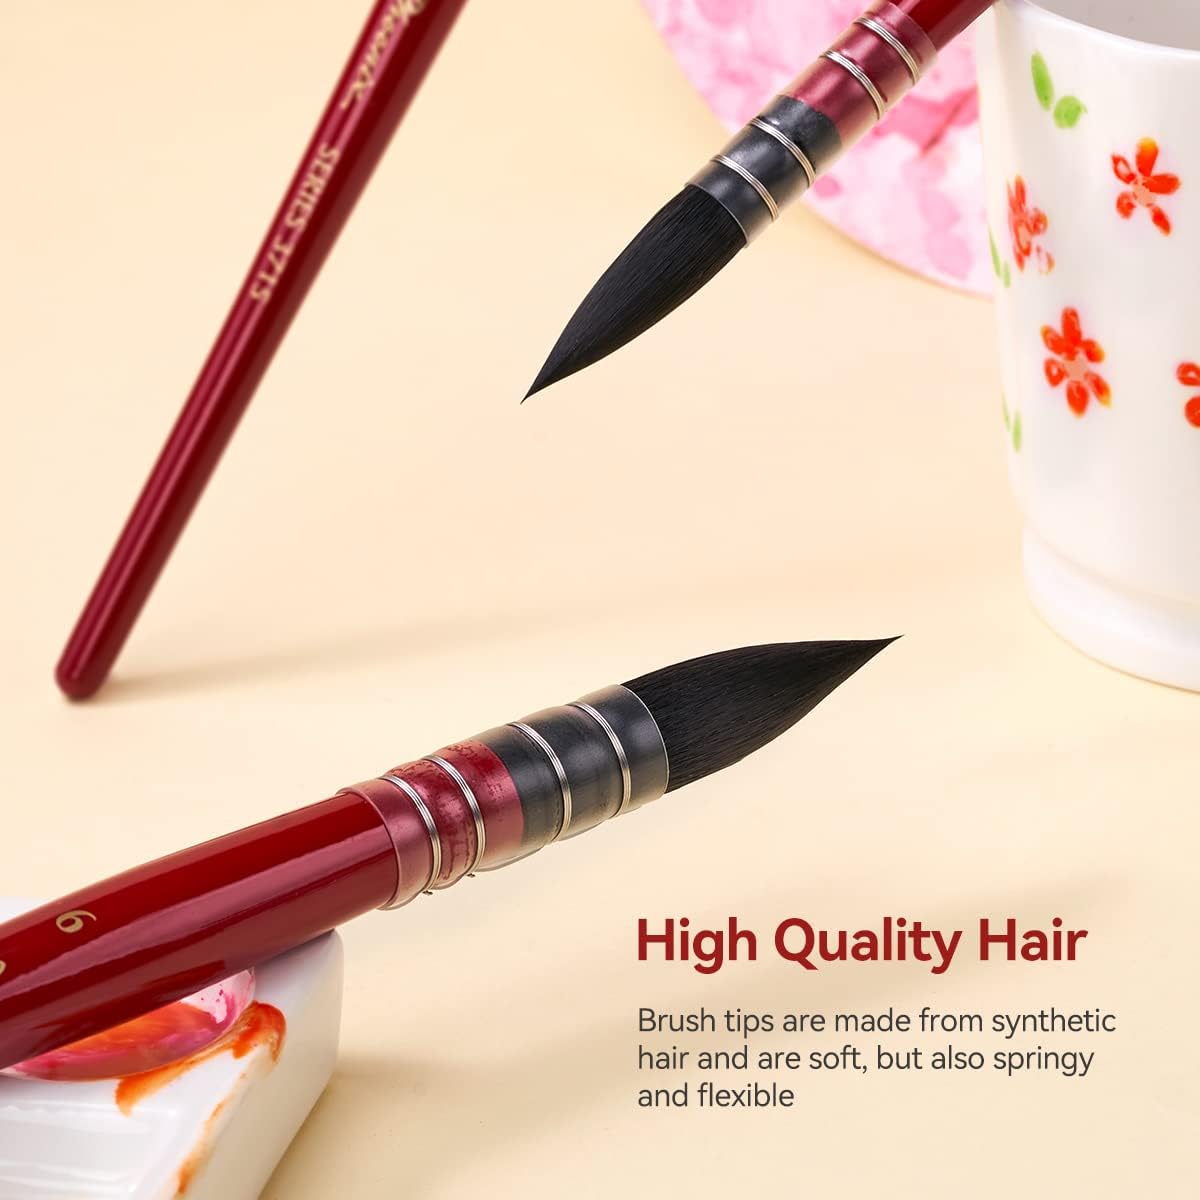 4PCS Watercolor Synthetic Squirrel Hair Paint Brushes Kit